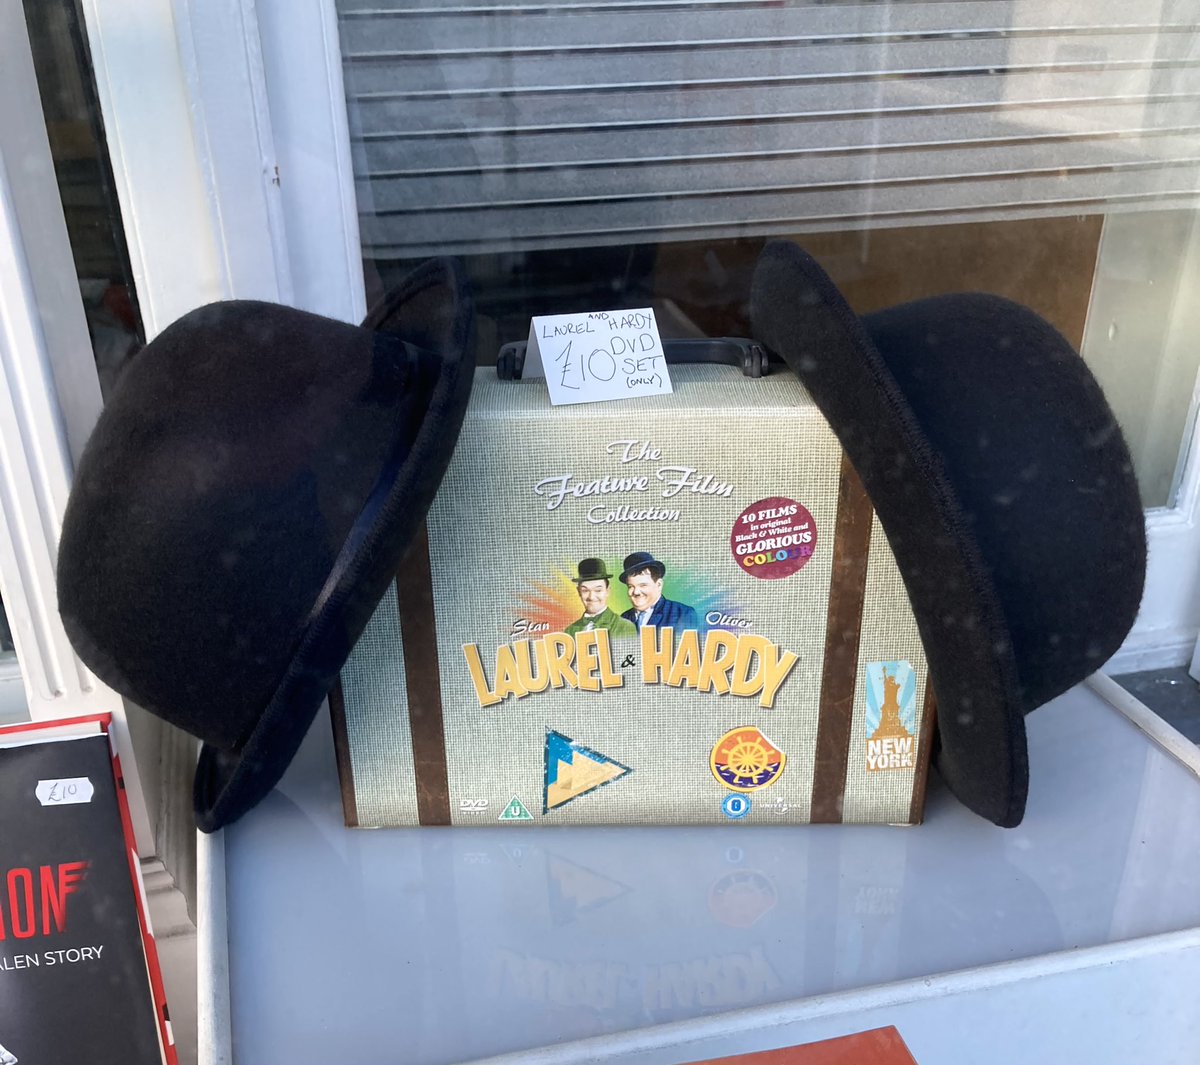 Spotted this display in window of  local #bookshop Savery Books in #Brighton #LaurelAndHardy #dvd #bowlerhat #suitcase #featurefilms #collection #windowdisplay

 @Stan_And_Ollie